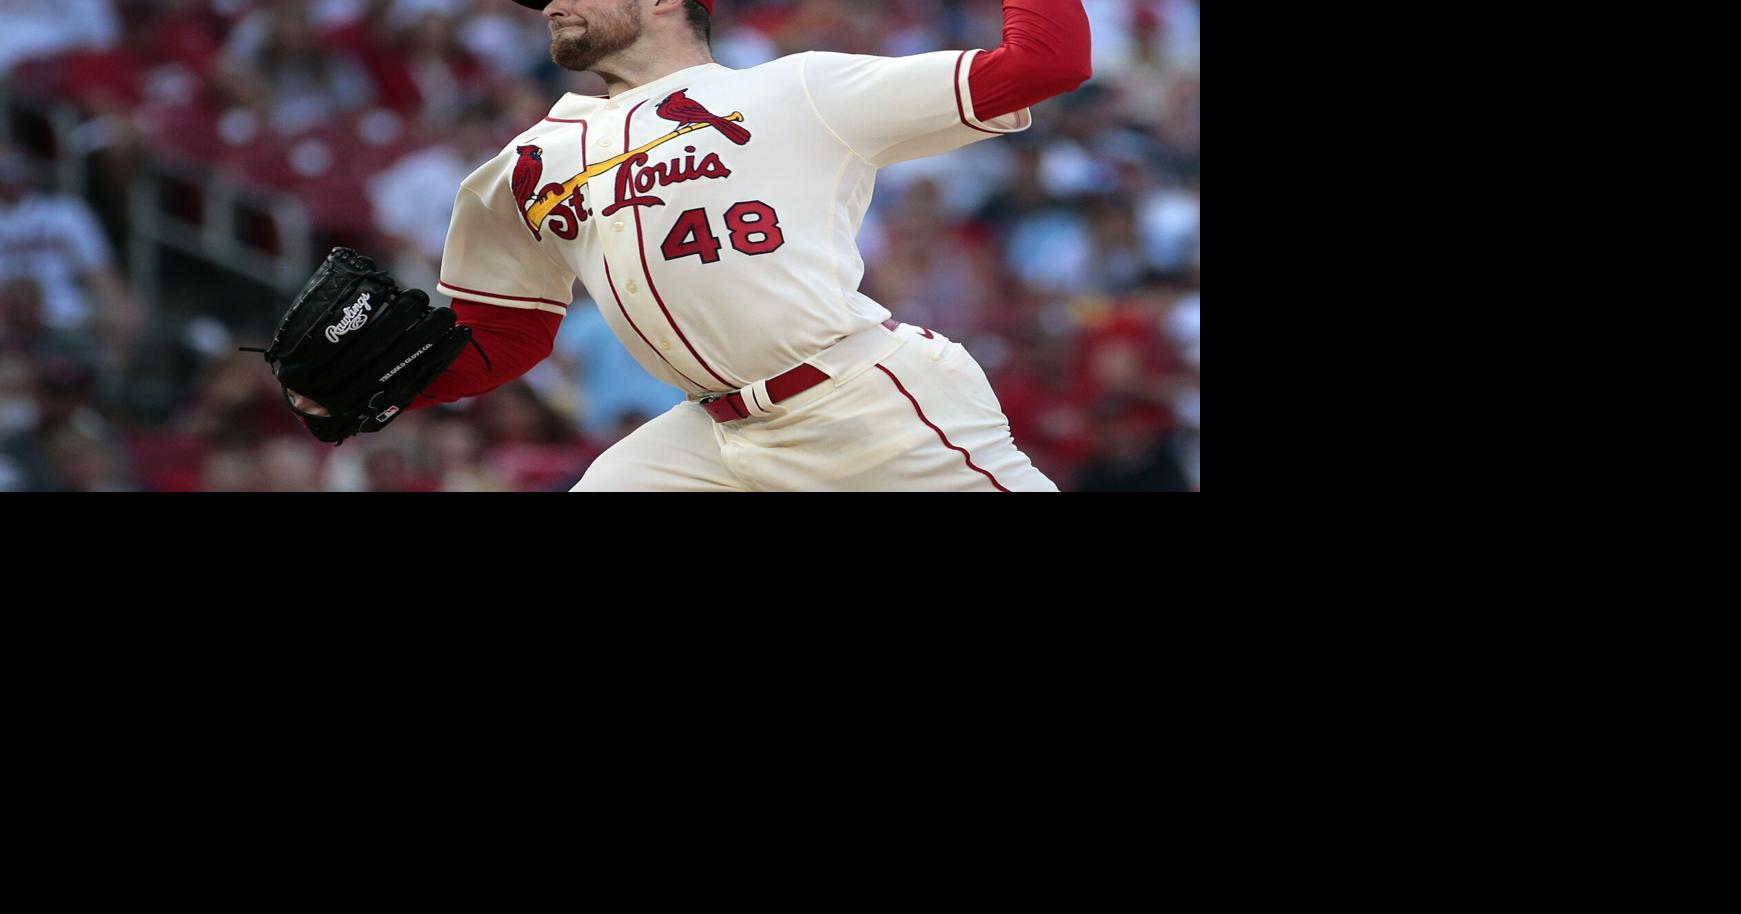 Gordo: Retooled Cardinals pitching staff could deliver collective